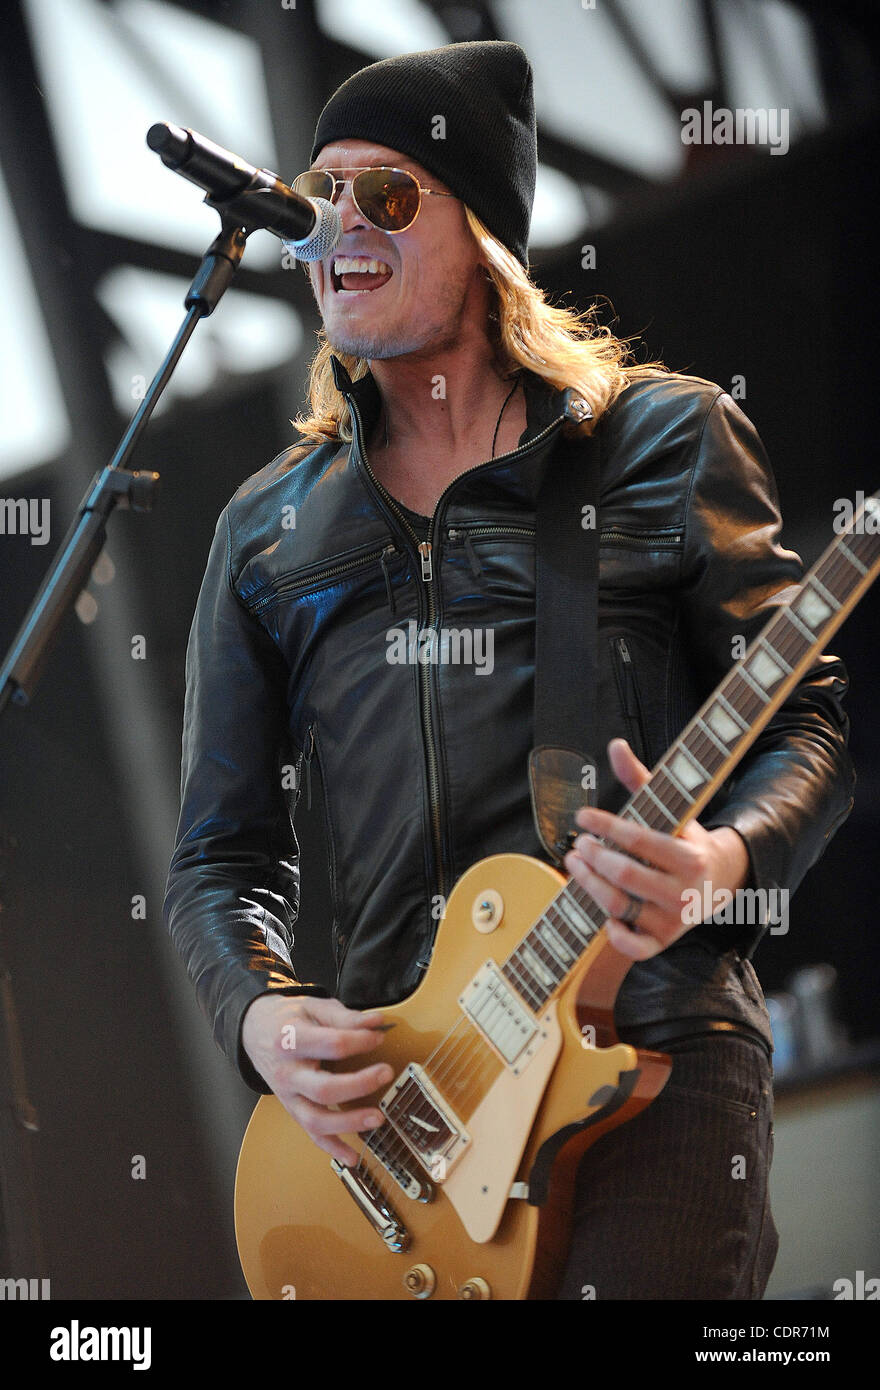 May. 22, 2011 - Columbus, Ohio; USA - Singer / Guitarist WES SCANTLIN of the band Puddle of Mudd  performs live as part of the 5th Annual Rock on the Range Music Festival that is taking place at the Crew Stadium located in Columbus. Copyright 2011 Jason Moore. (Credit Image: © Jason Moore/ZUMAPRESS. Stock Photo